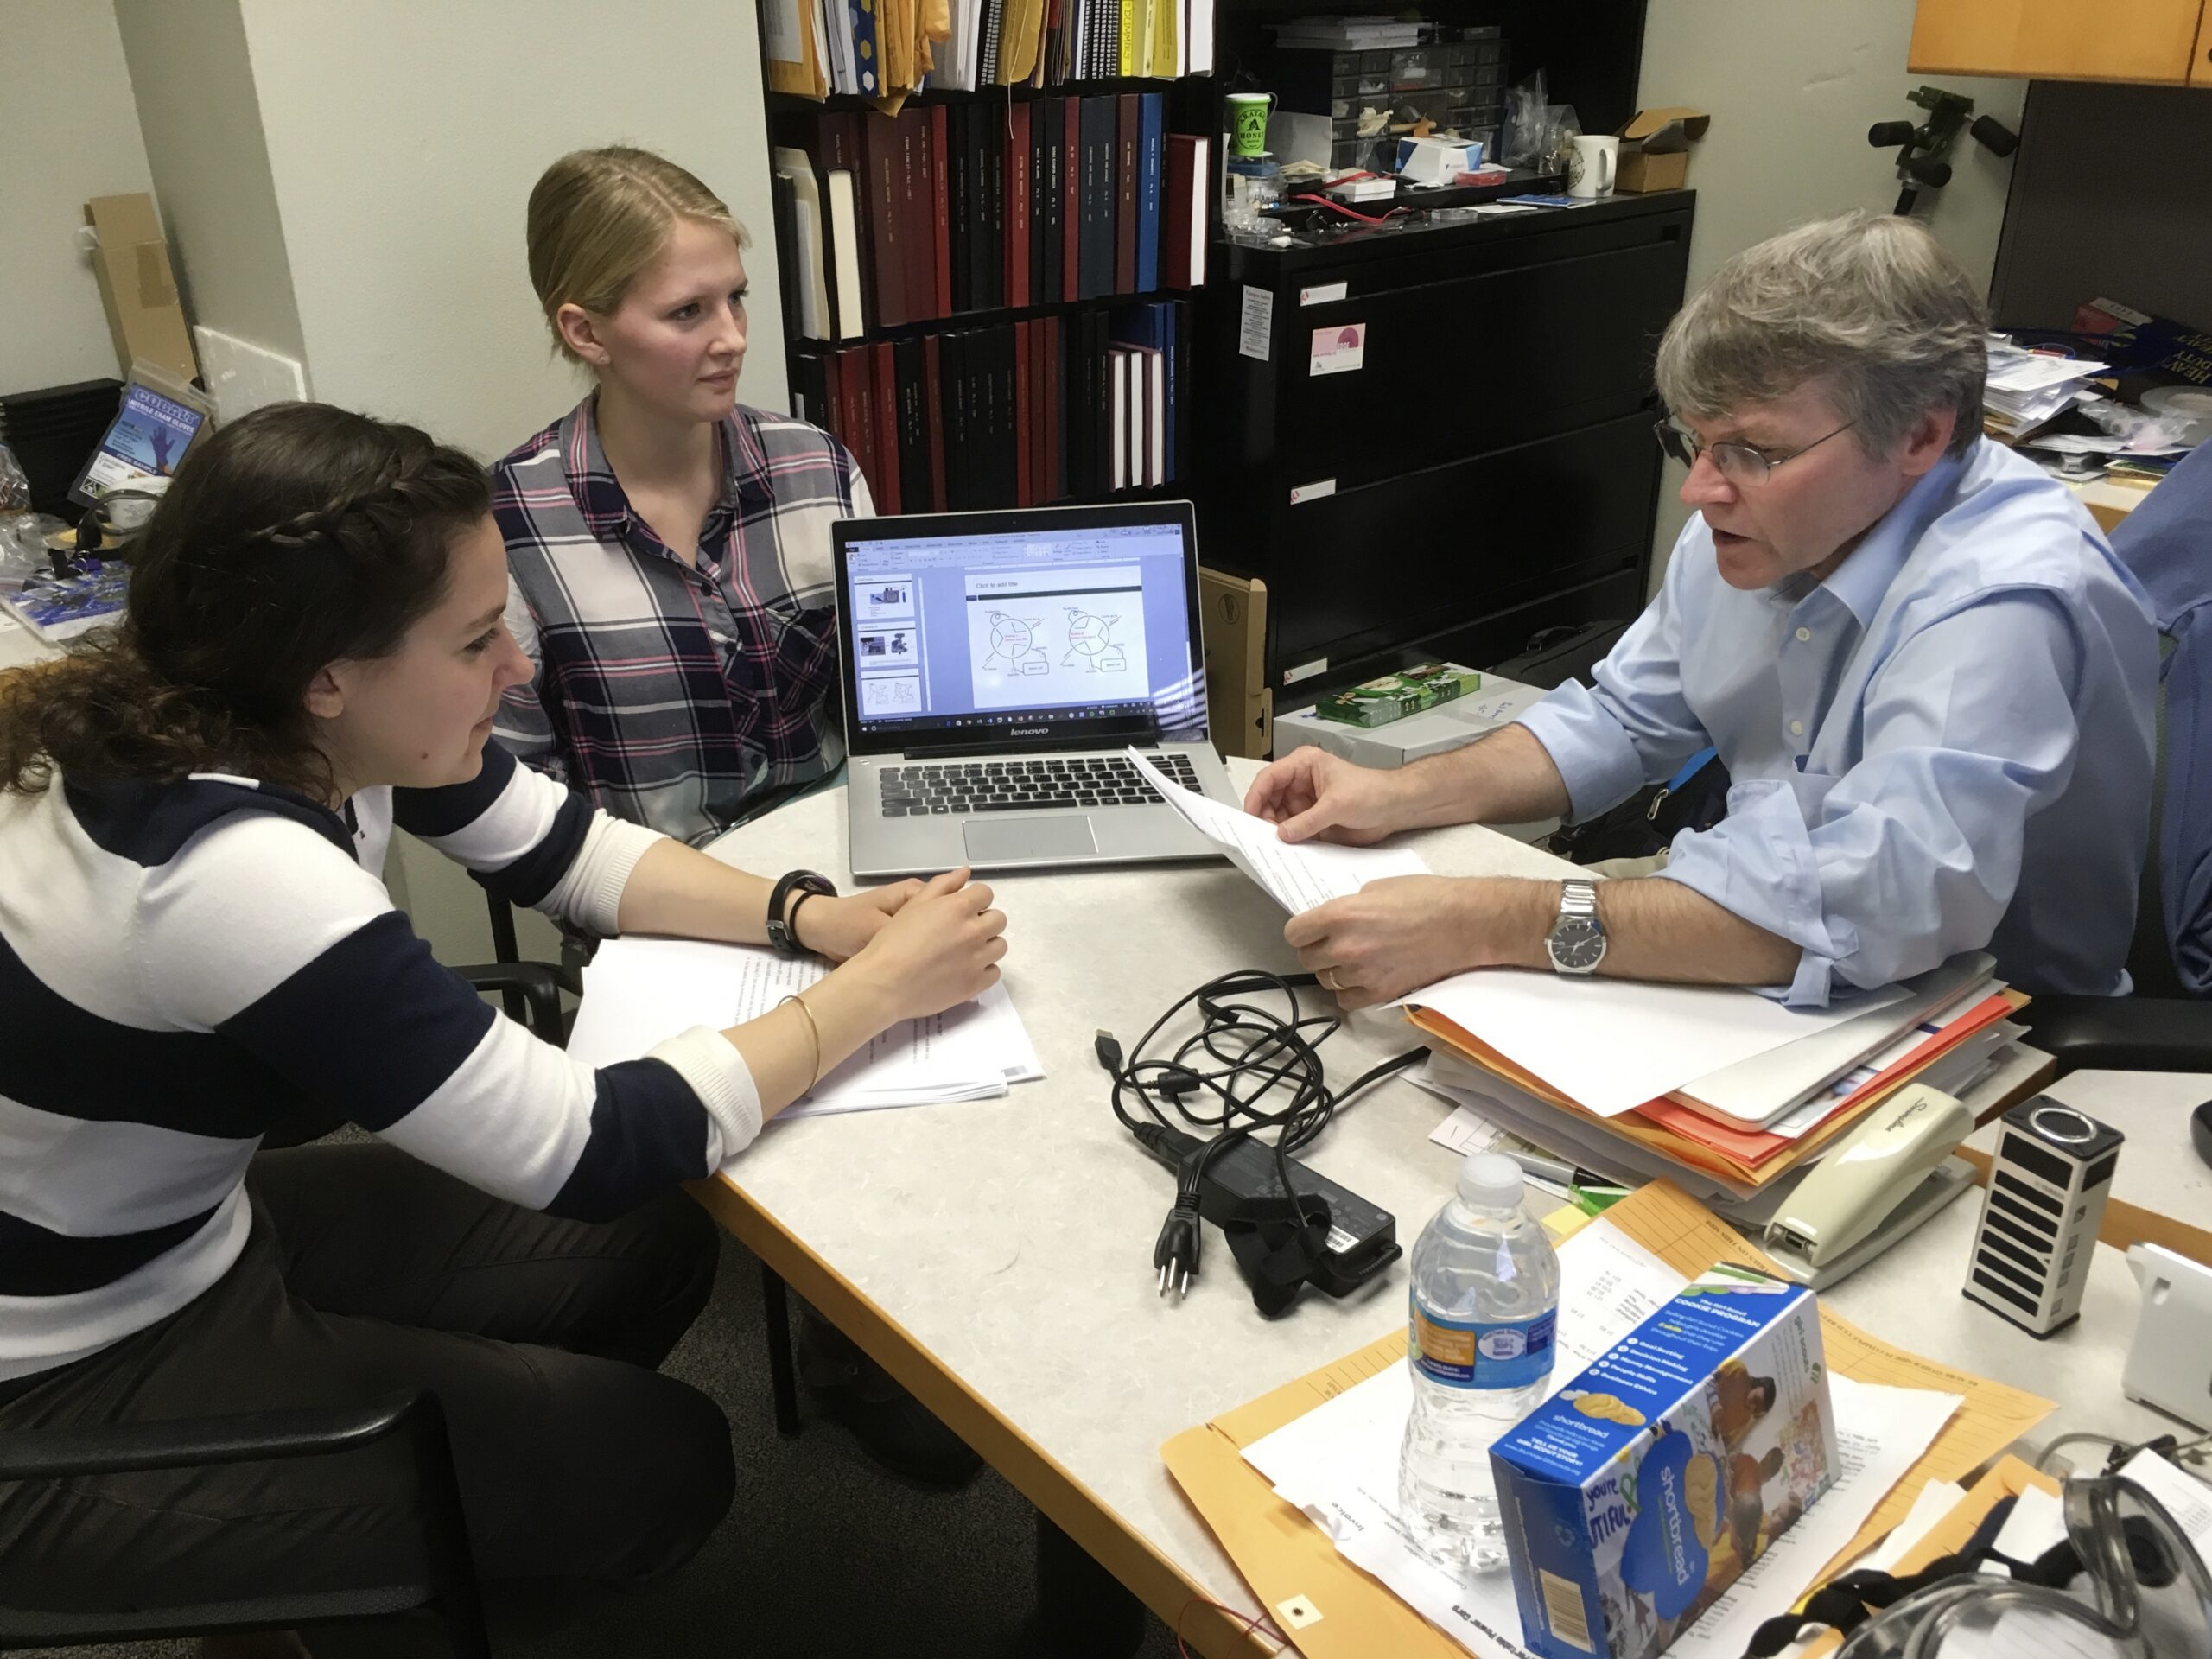 University of Wisconsin-Madison chemistry professor Robert Hamers confers with junior Alice Horein and doctoral candidate Sarah Guillot on their research projects during a meeting in Hamers' campus office.